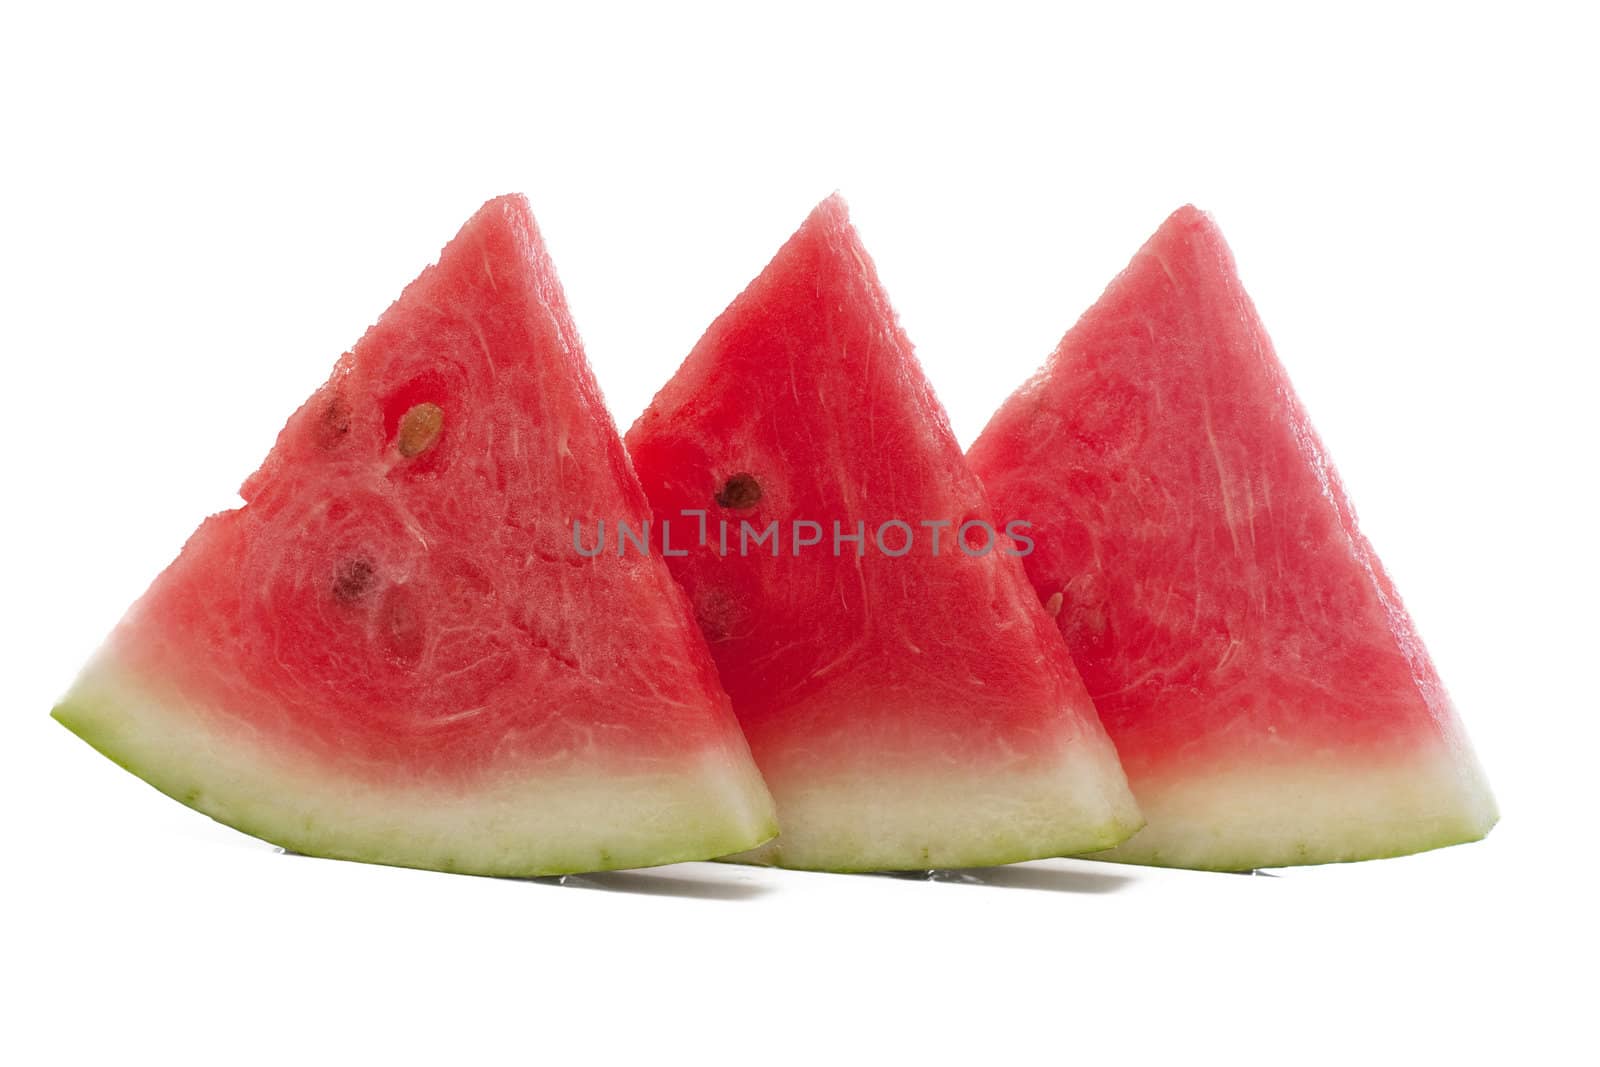 Three pieces of watermelon isolated over white.